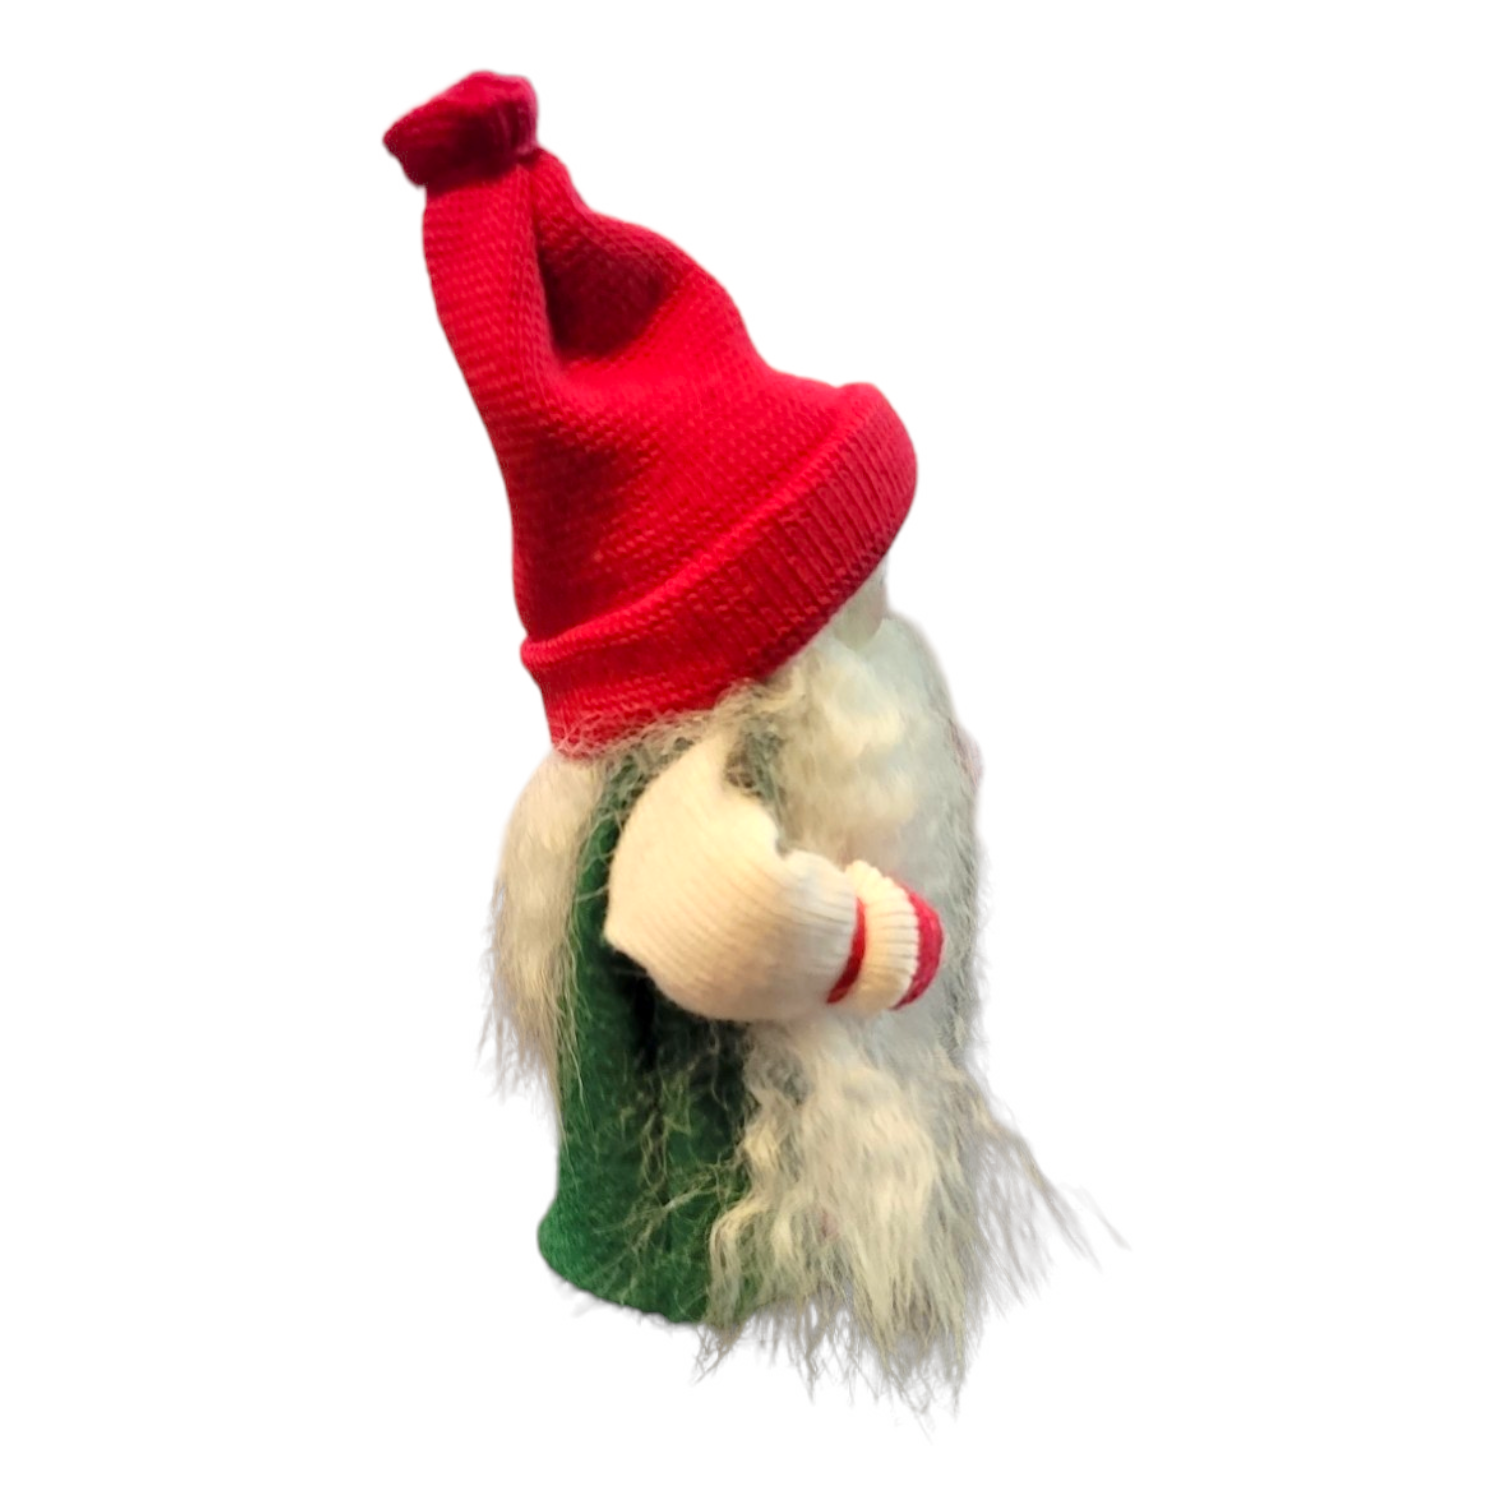 Figurine: Tomte with Red Moose